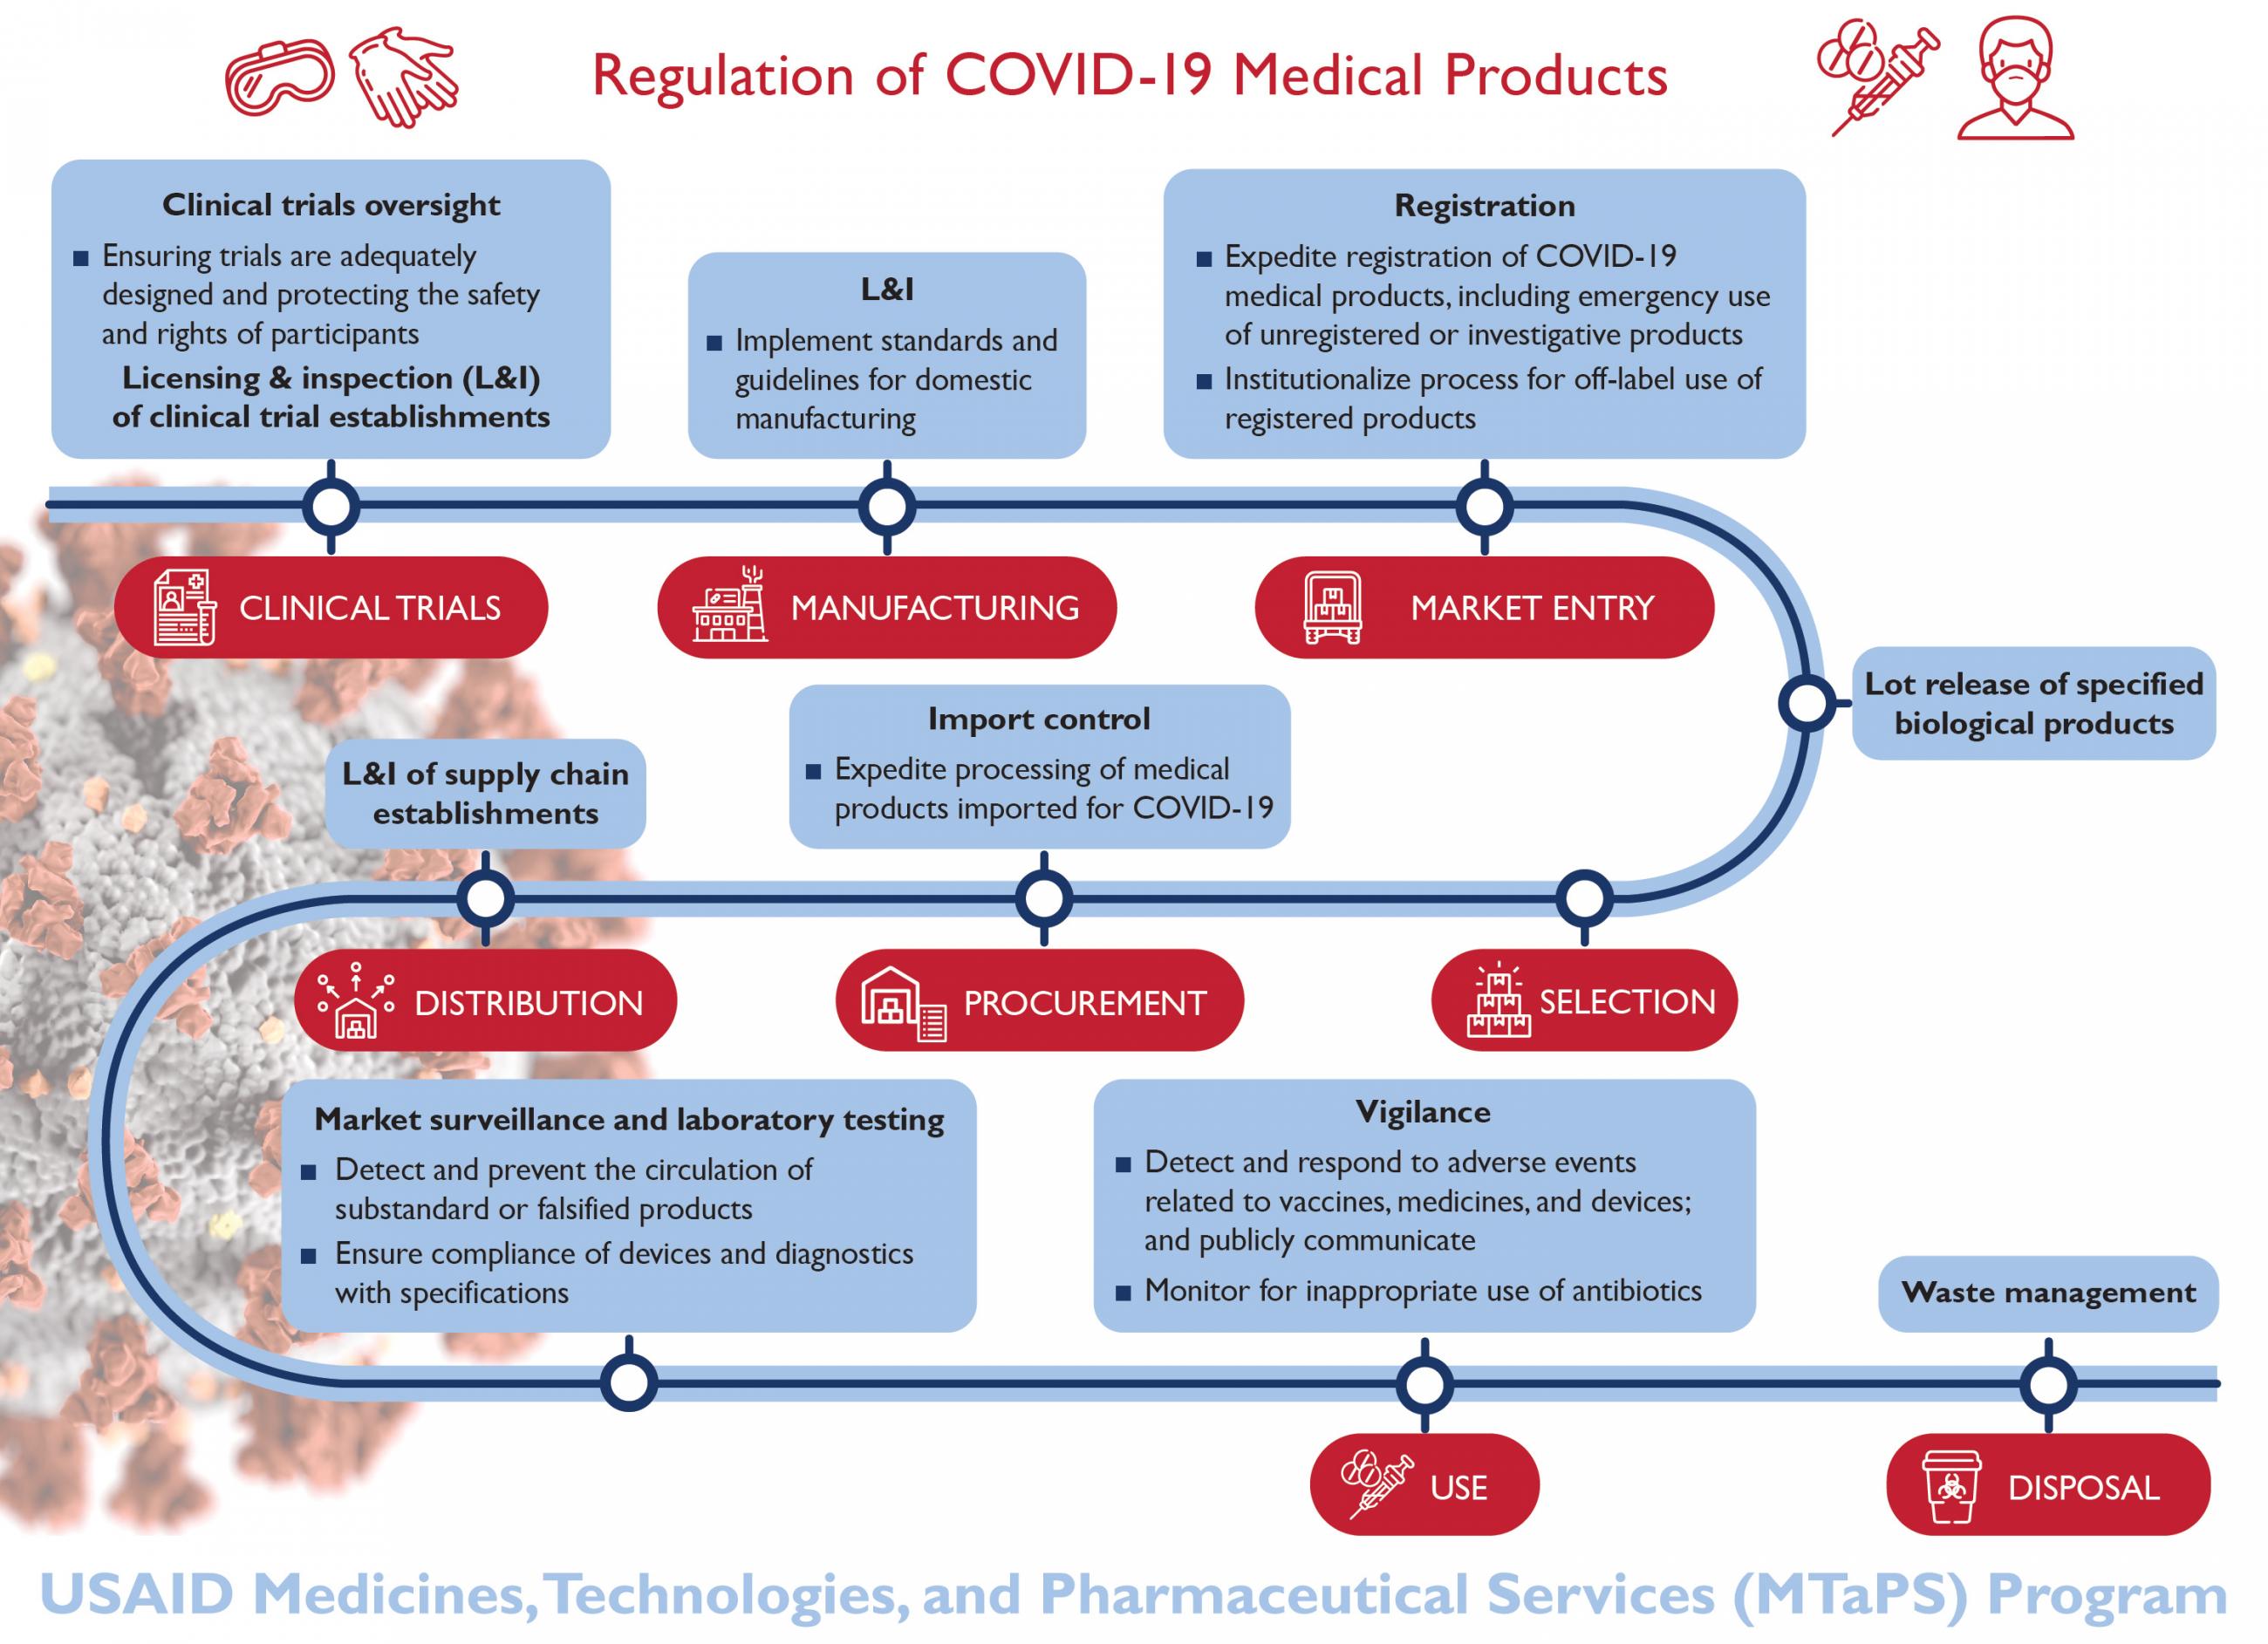 The image shows a flowchart showing the different regulatory stages of medical products. 